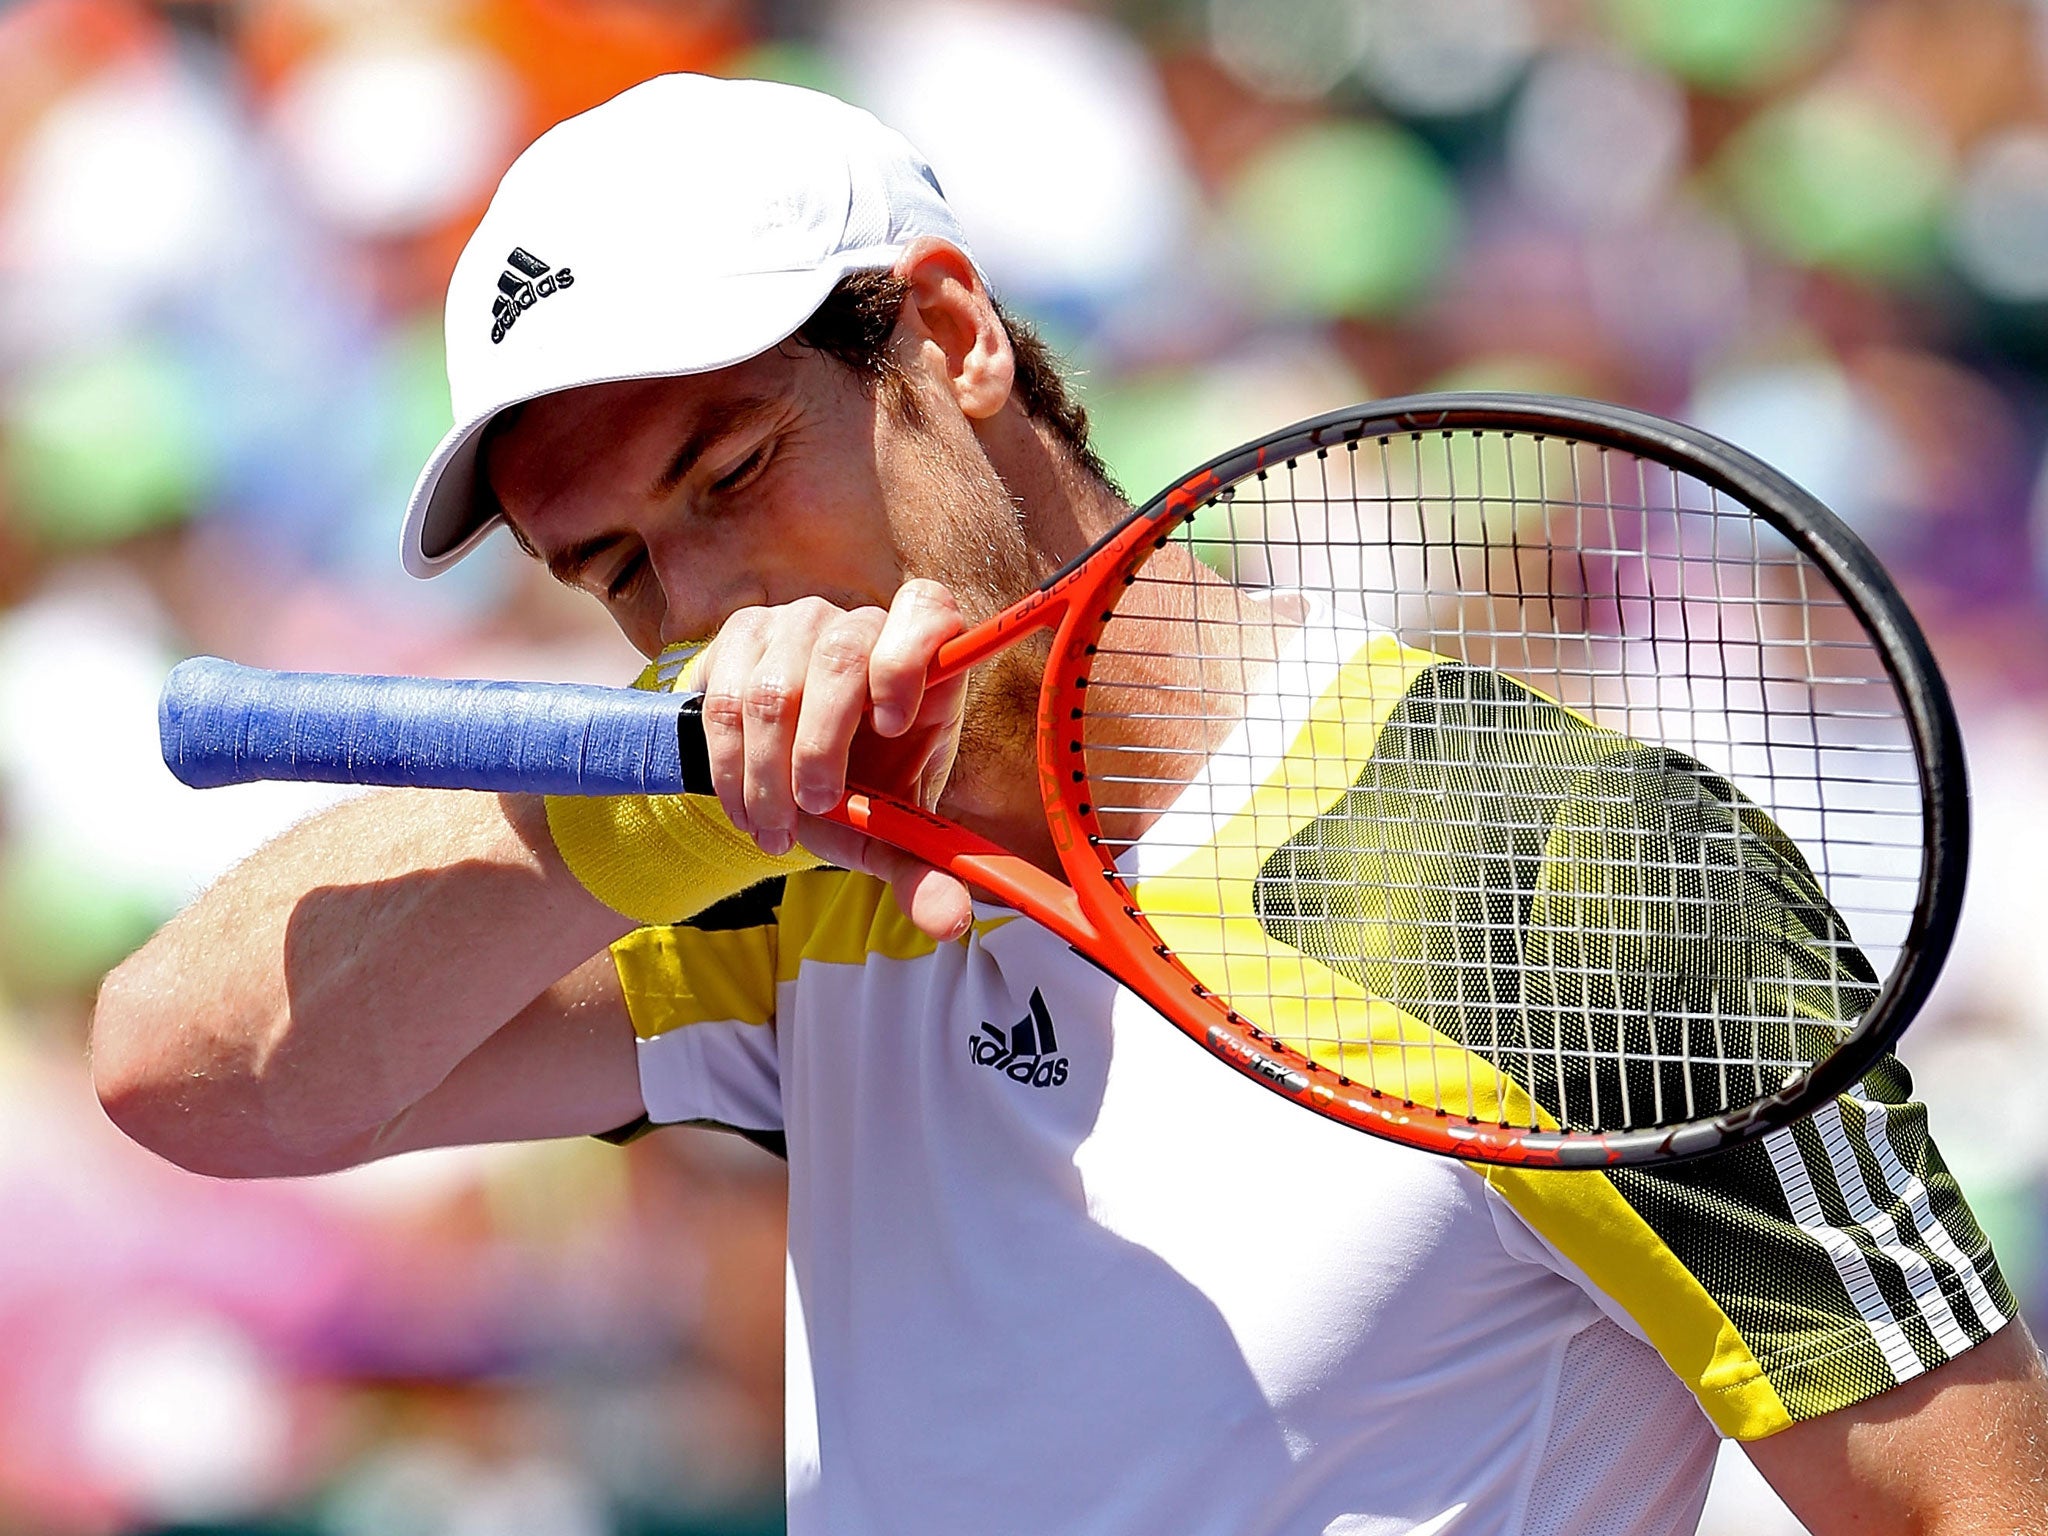 Andy Murray of Great Britain wipes his face between points